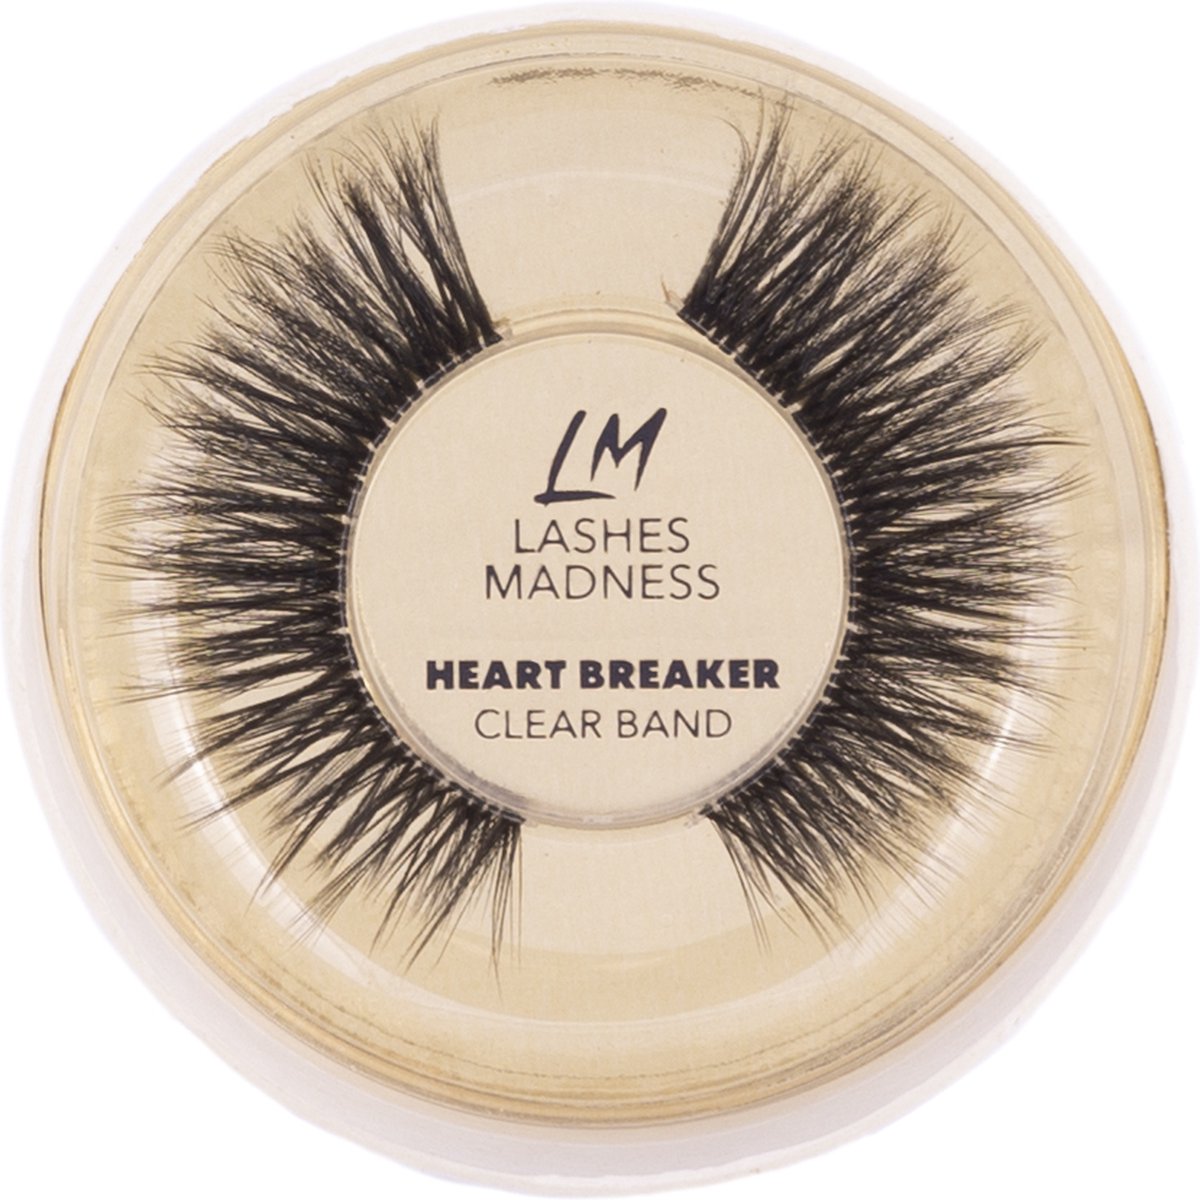 Lashes Madness - HEART BREAKER - Clear Band - Vegan Mink Lashes - Wimpers - Valse Wimpers - Eyelashes - Luxe Wimpers